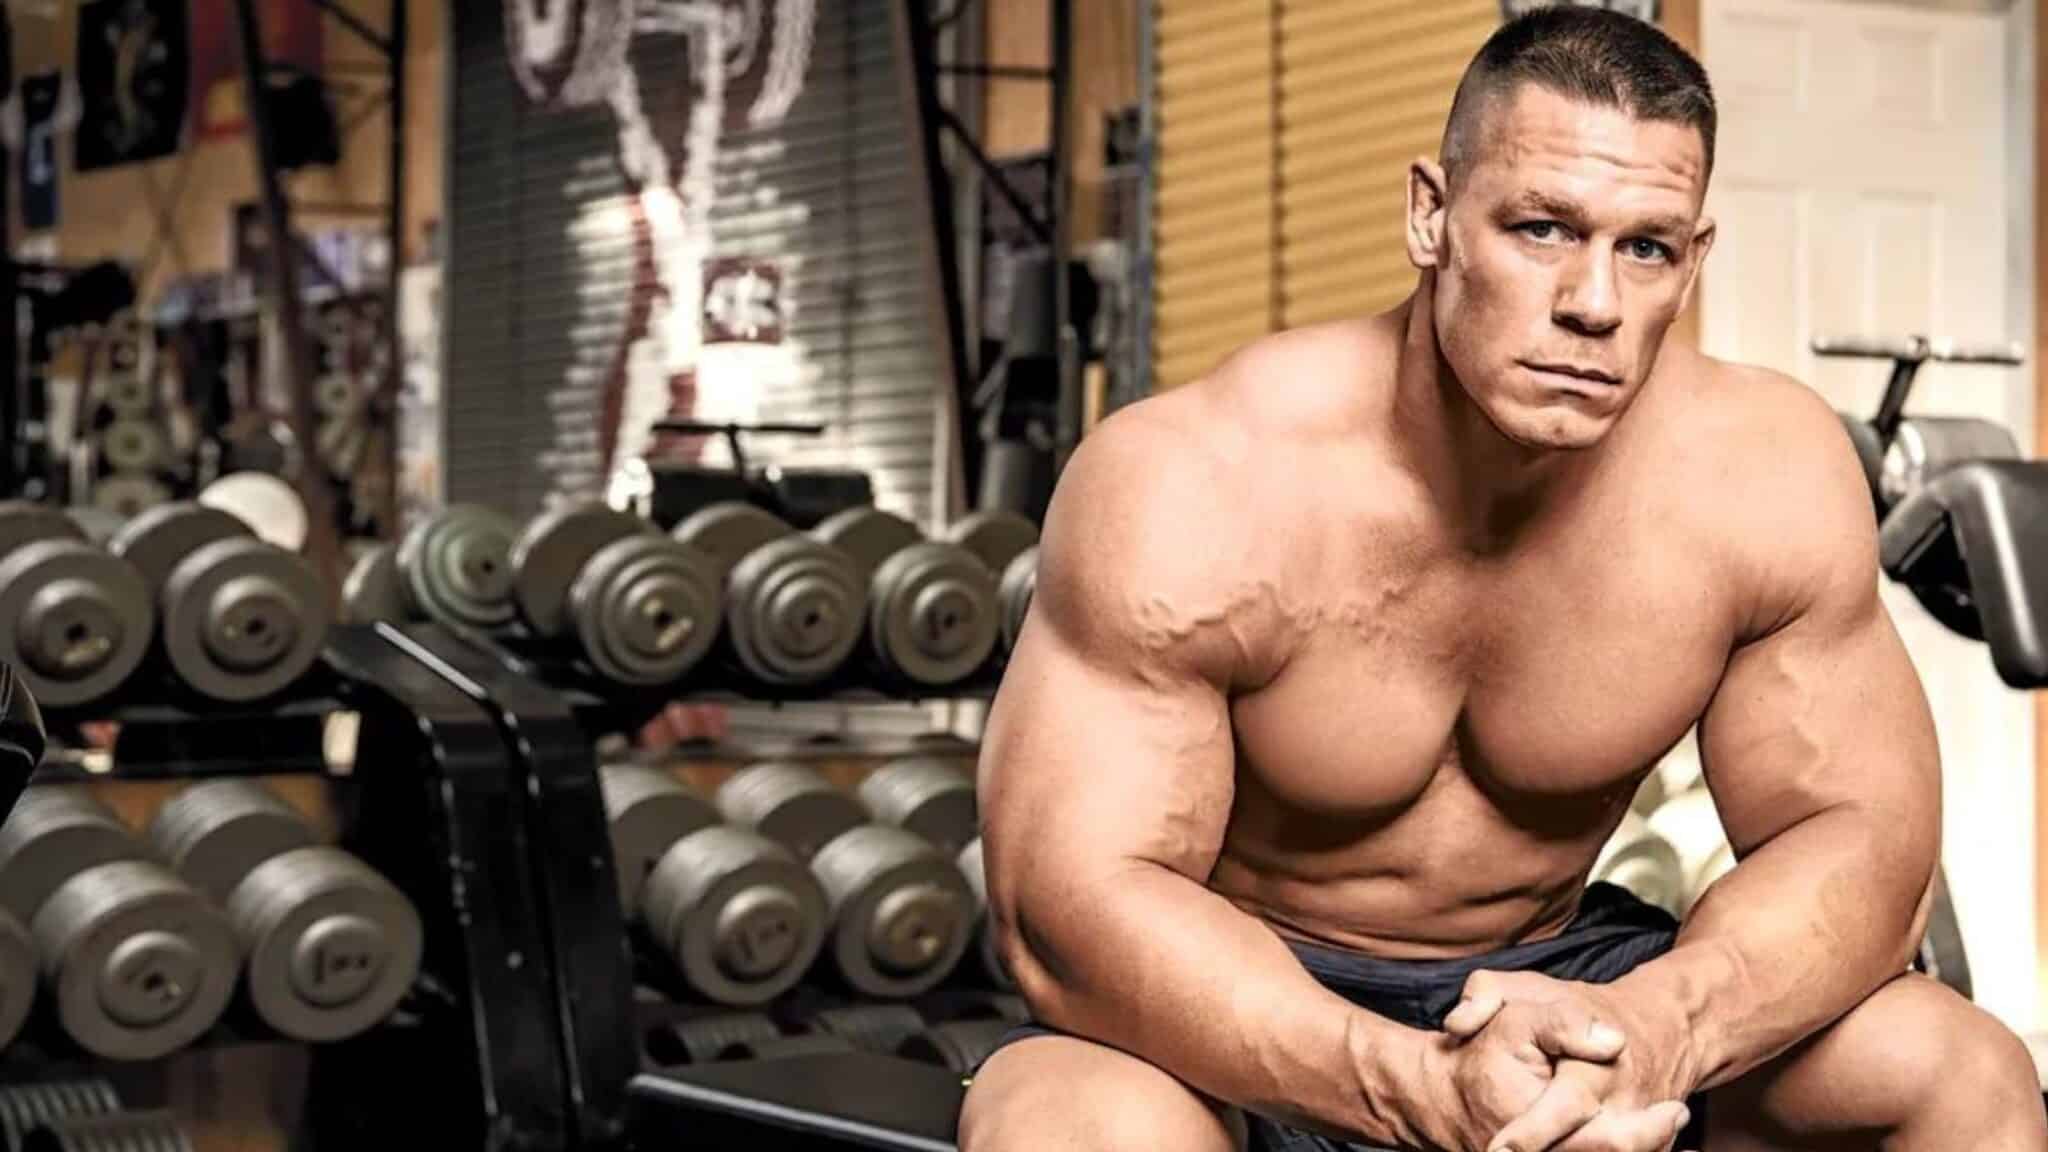 Shirtless athlete John Cena sits on a weight bench in a gym.